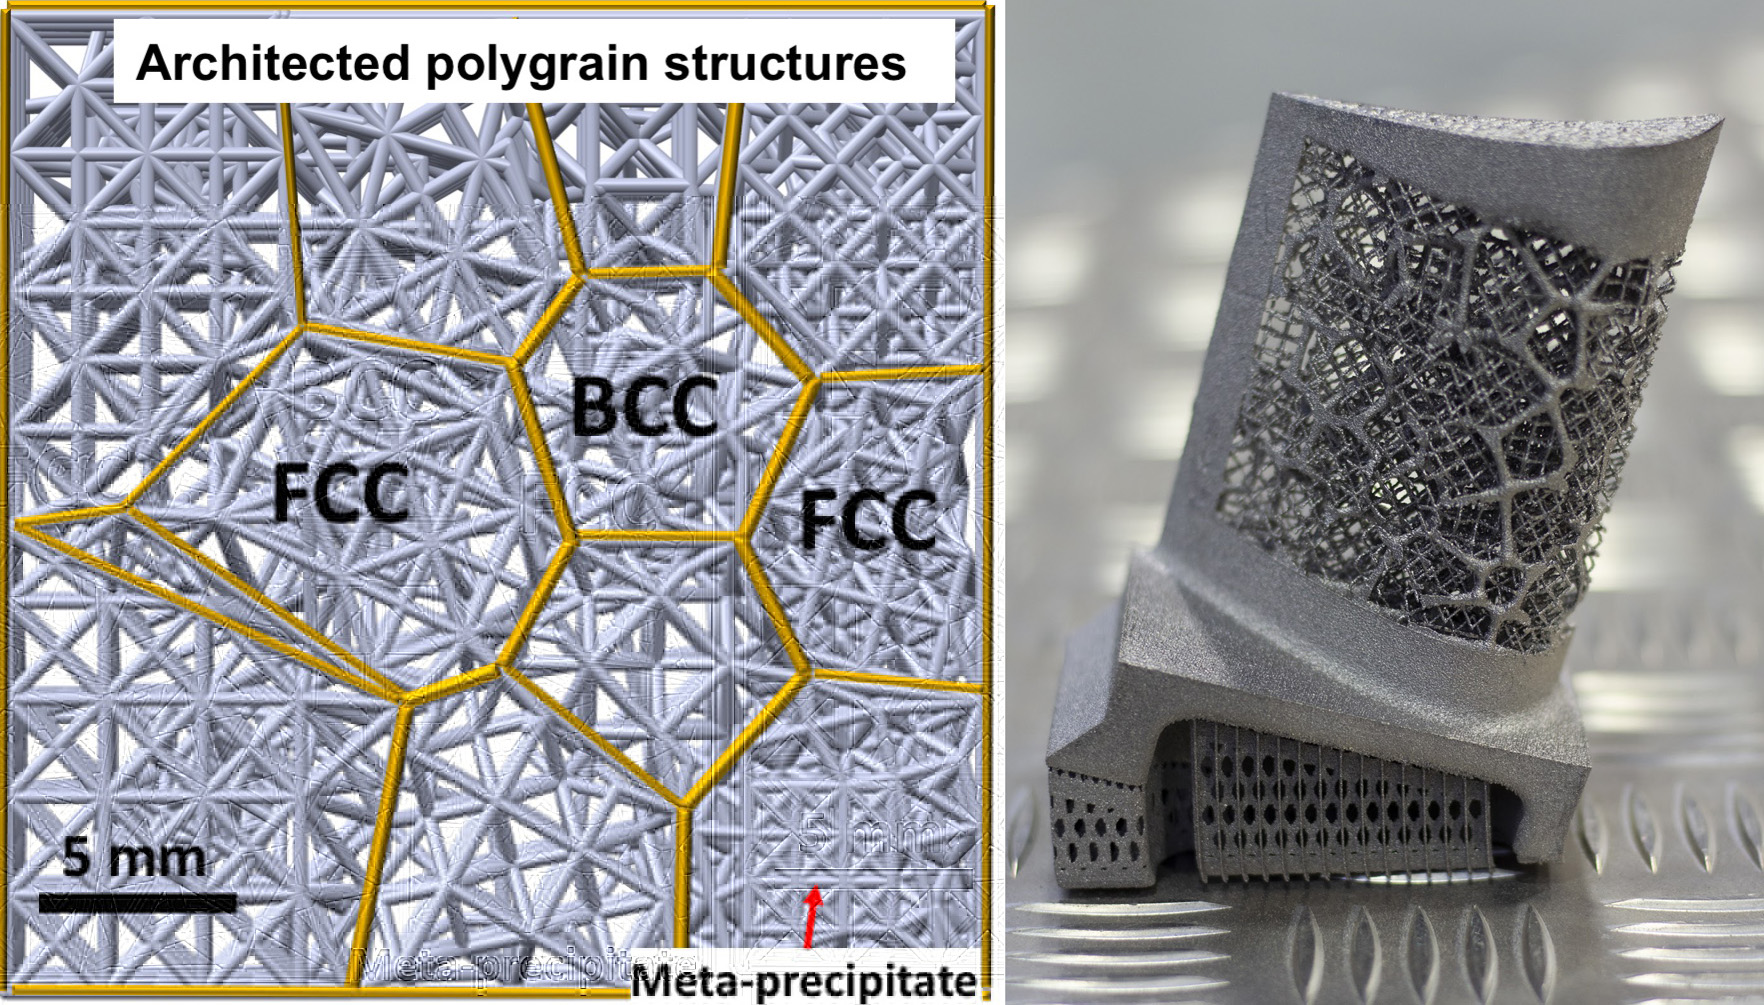 Study explores development of meta-crystals by Additive Manufacturing